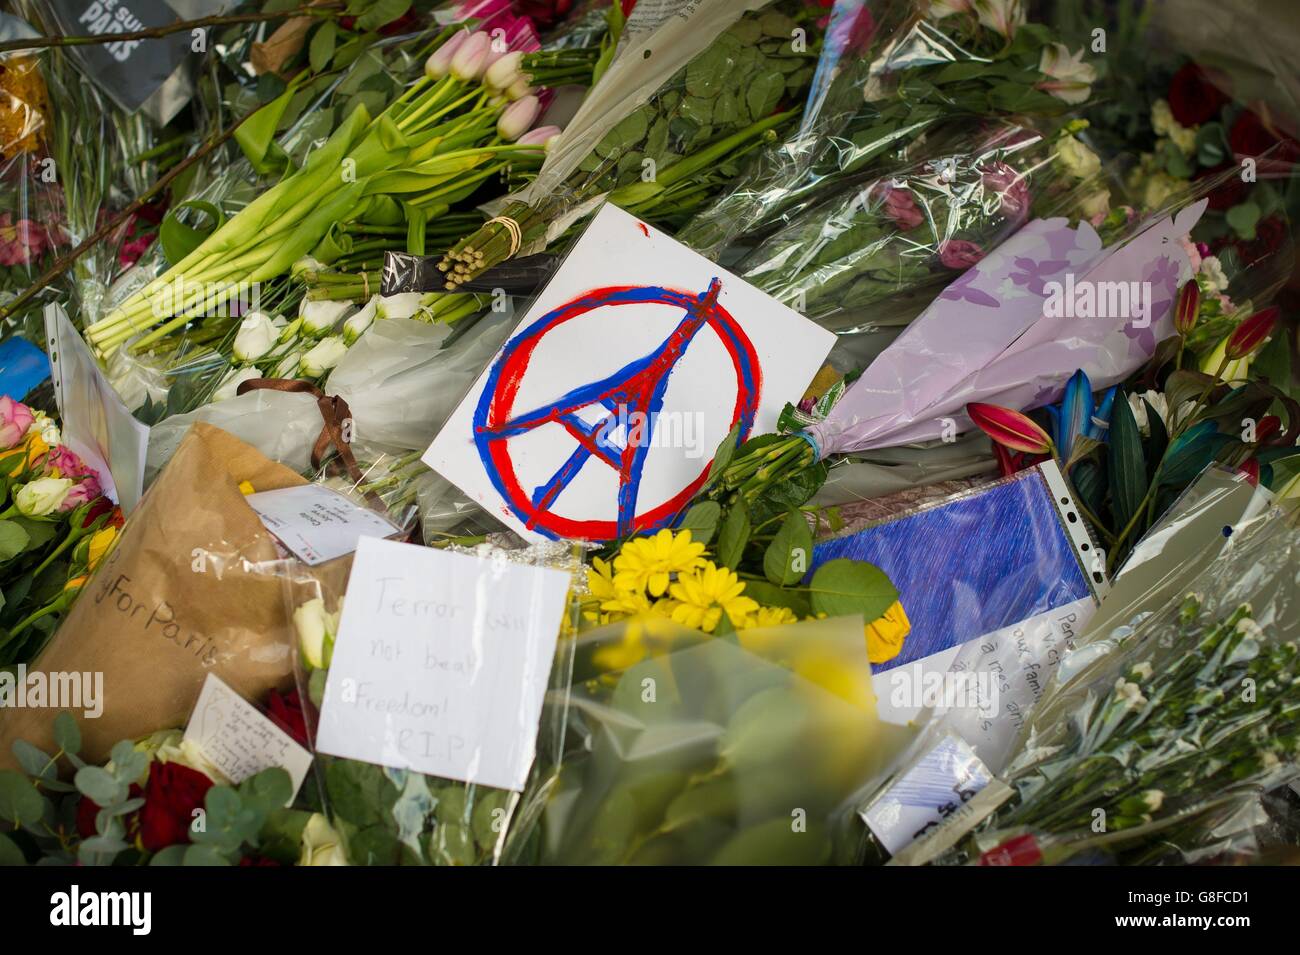 Floral tributes the victims of the terrorist attacks in Paris, outside the French Embassy, in Knightsbridge, London. Stock Photo